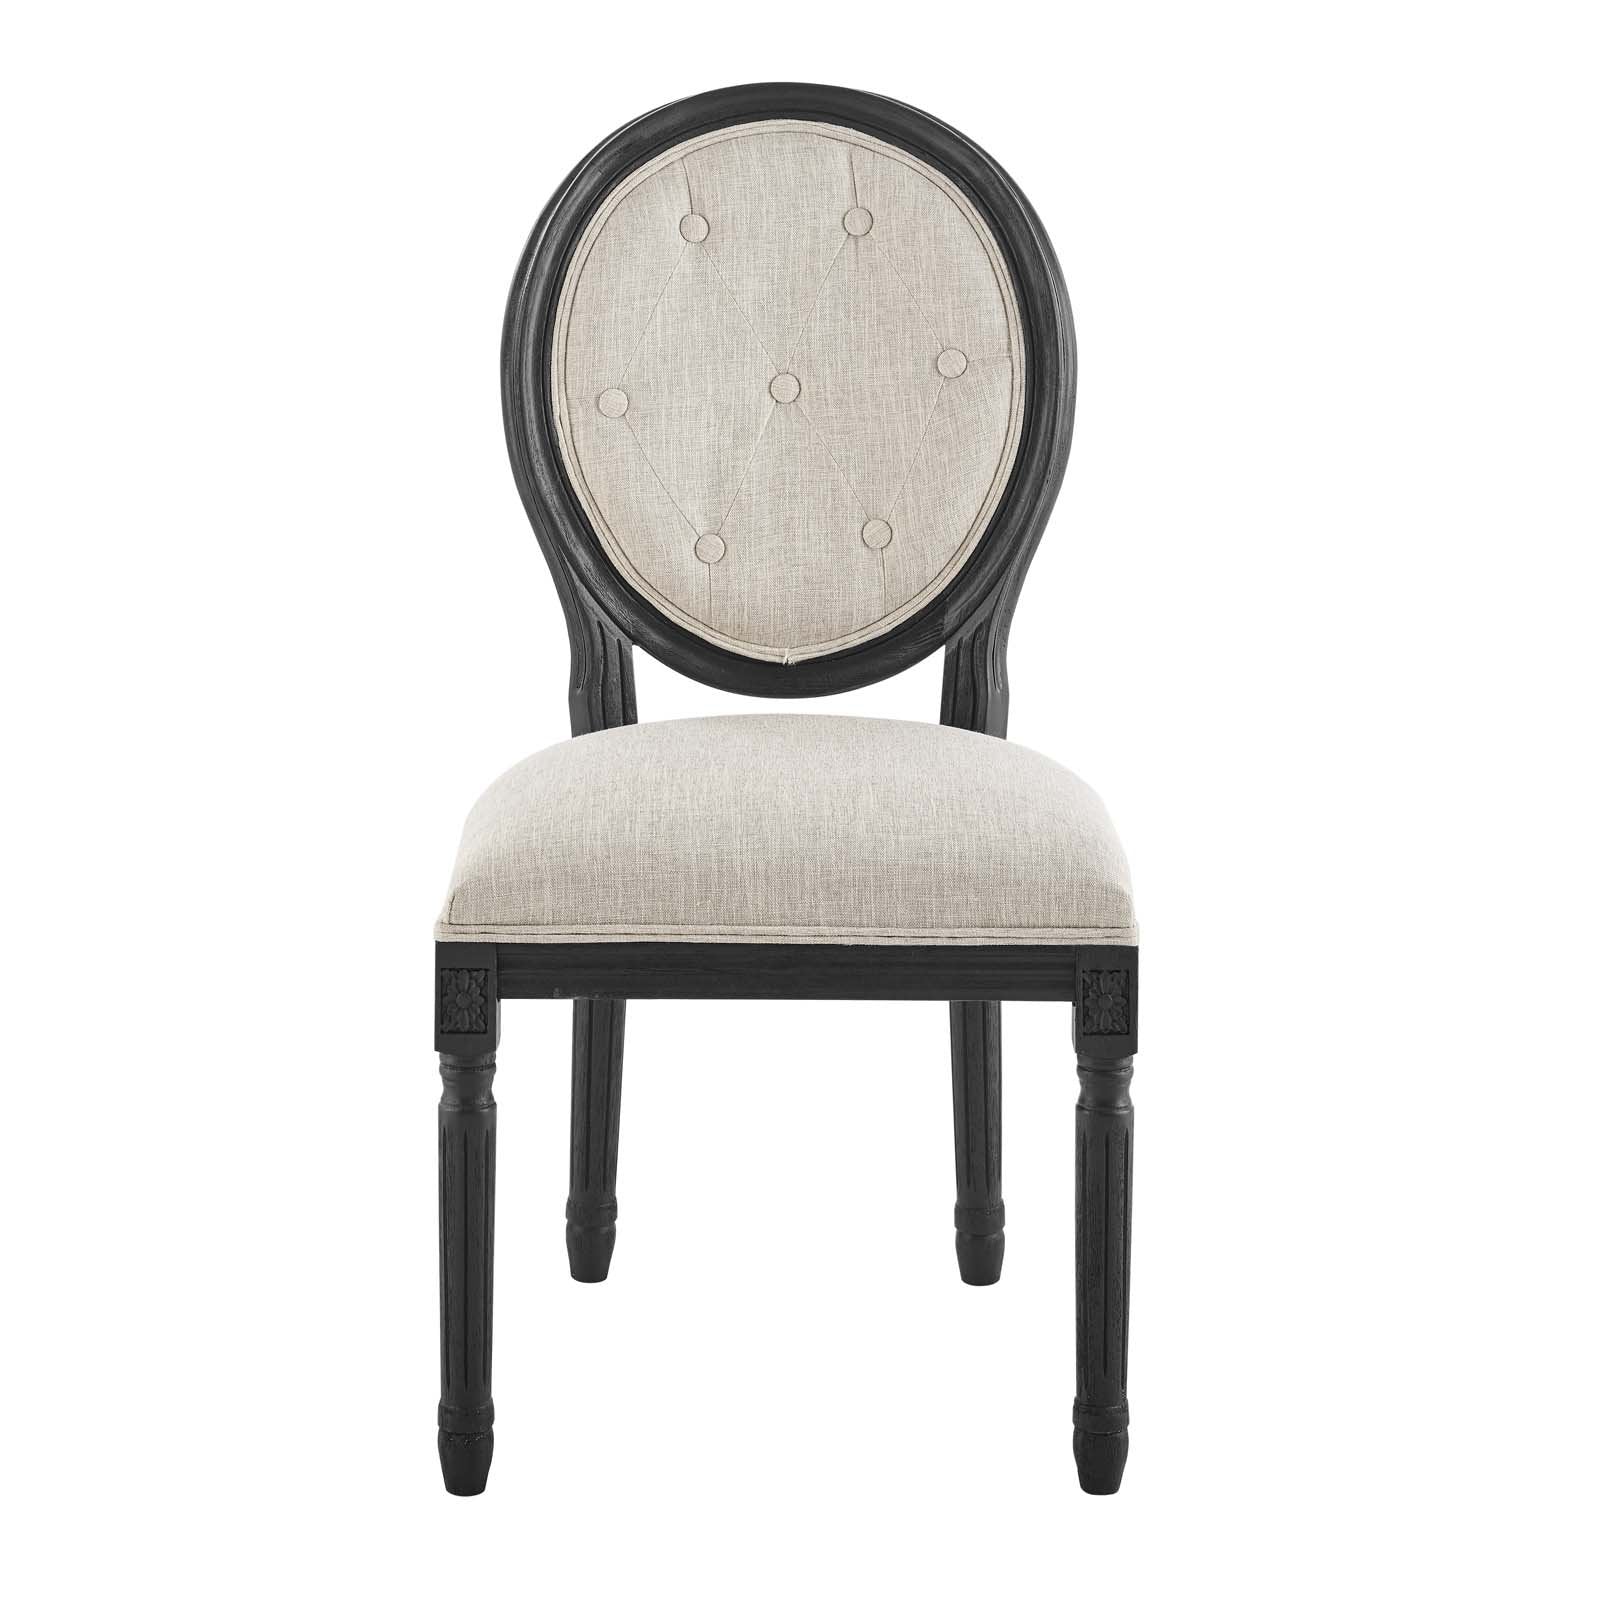 Arise Vintage French Upholstered Fabric Dining Side Chair - East Shore Modern Home Furnishings